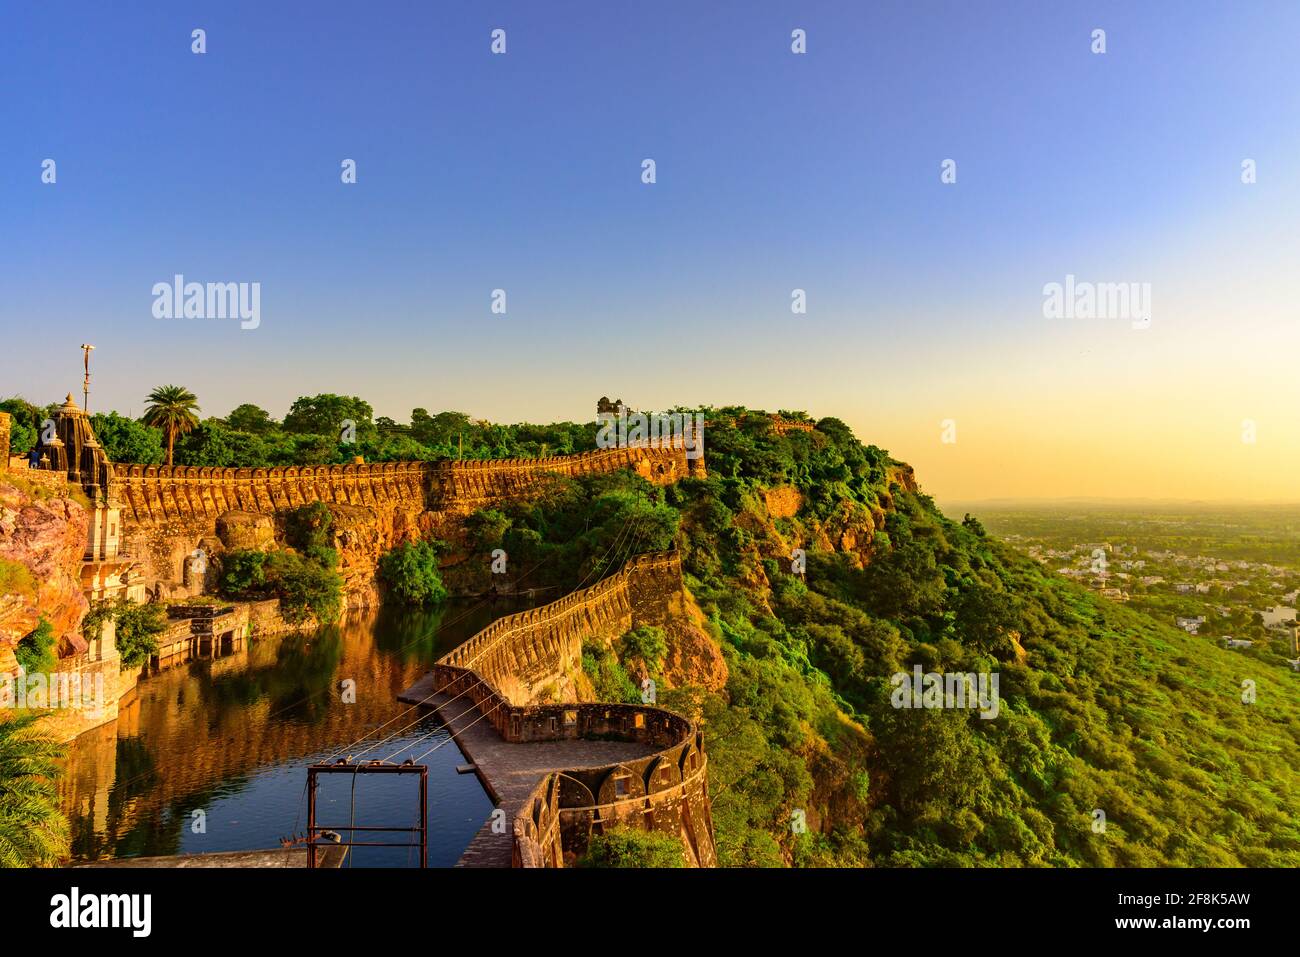 View during sunset from Chittor or Chittorgarh Fort with city in backdrop. It is one of the largest forts in India &  listed in the UNESCO World Herit Stock Photo